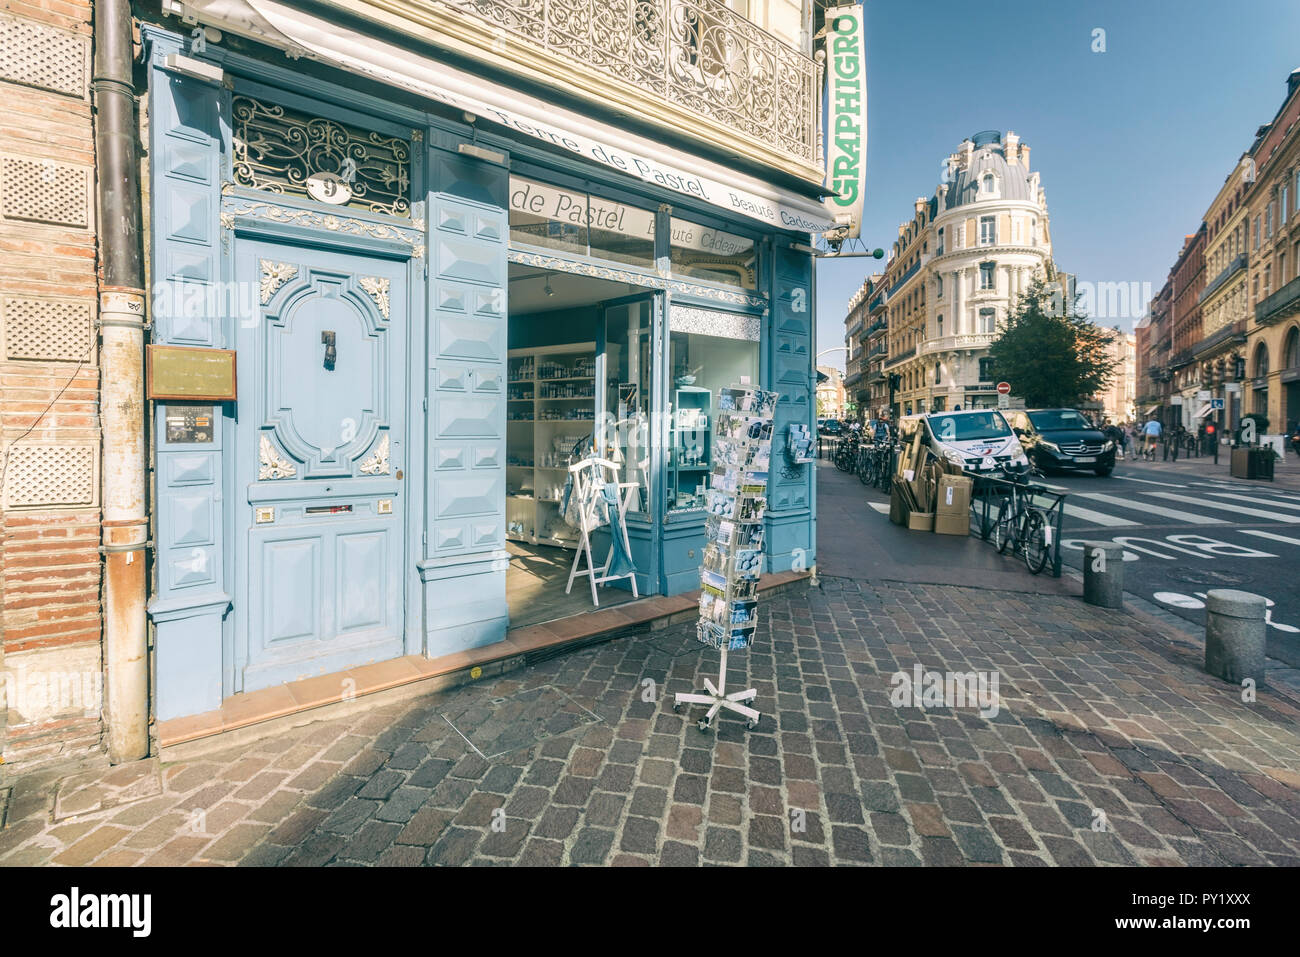 Gift shop Terre de Pastel at rue de Metz seen on sunny day, Toulouse, Occitanie, France Stock Photo